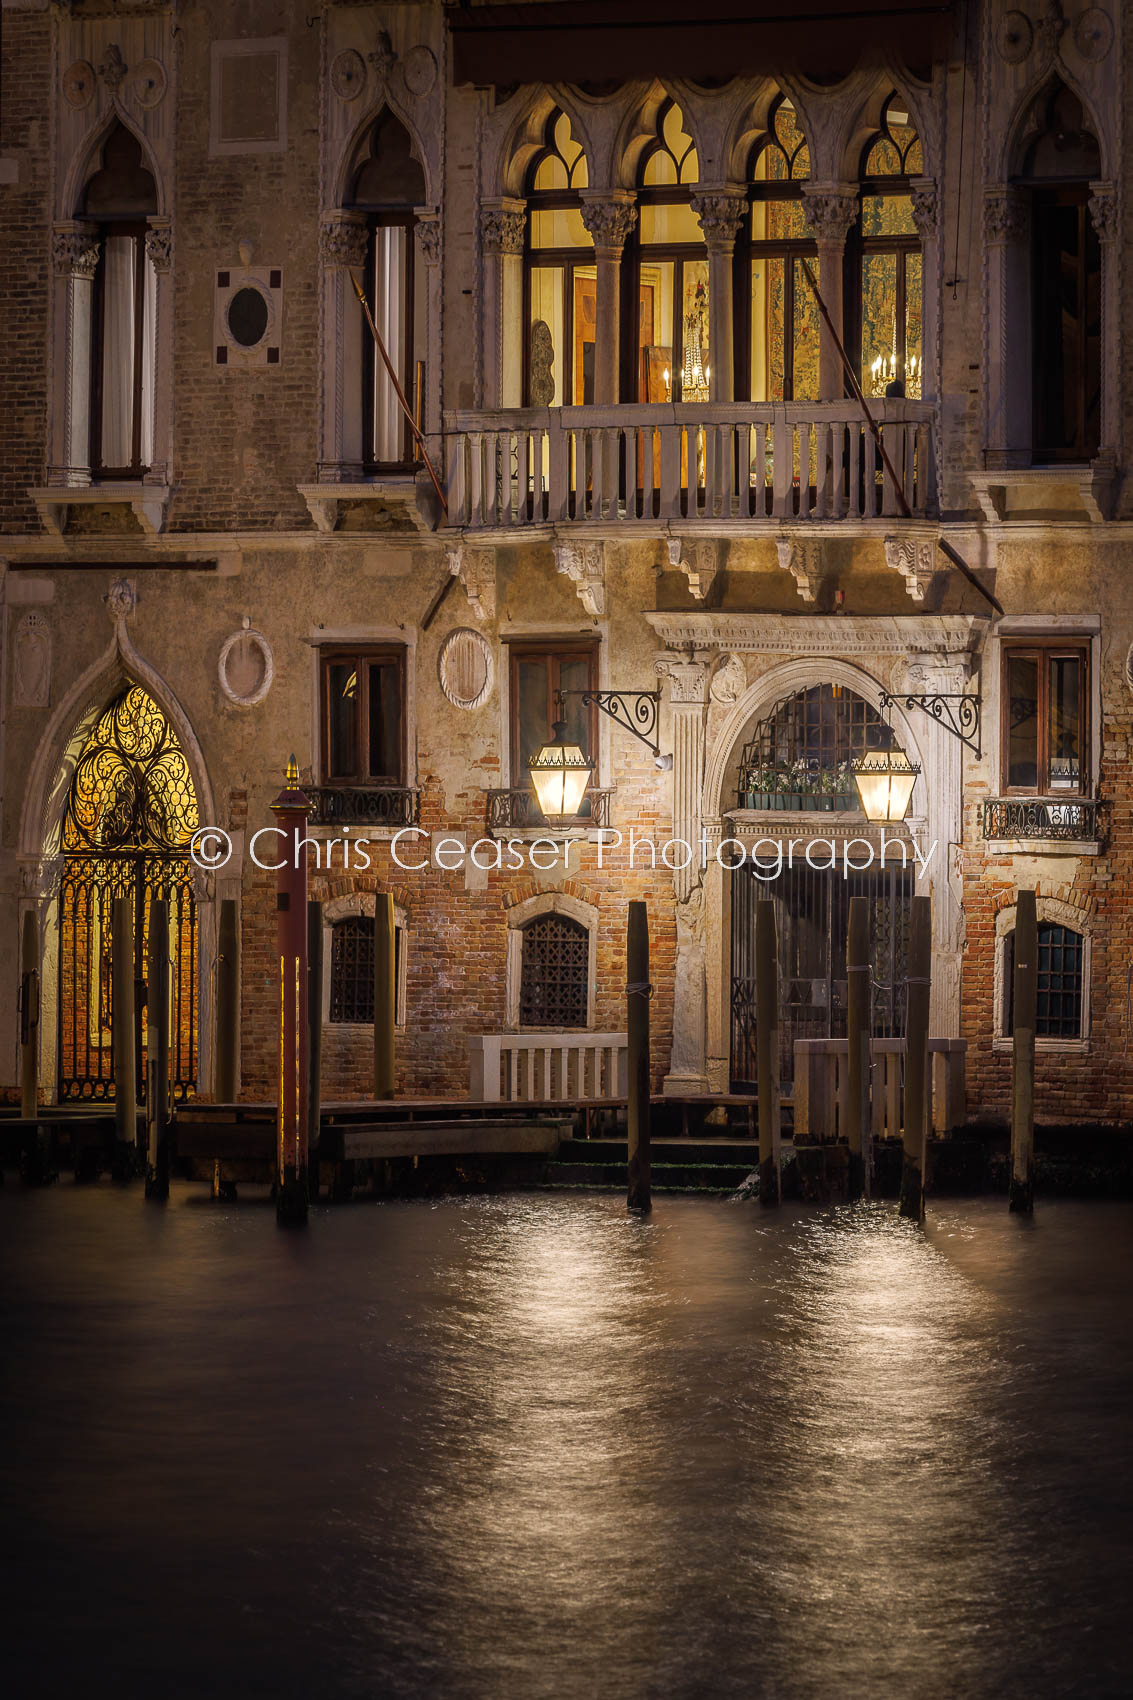 Evening By The Palazzo, Grand Canal